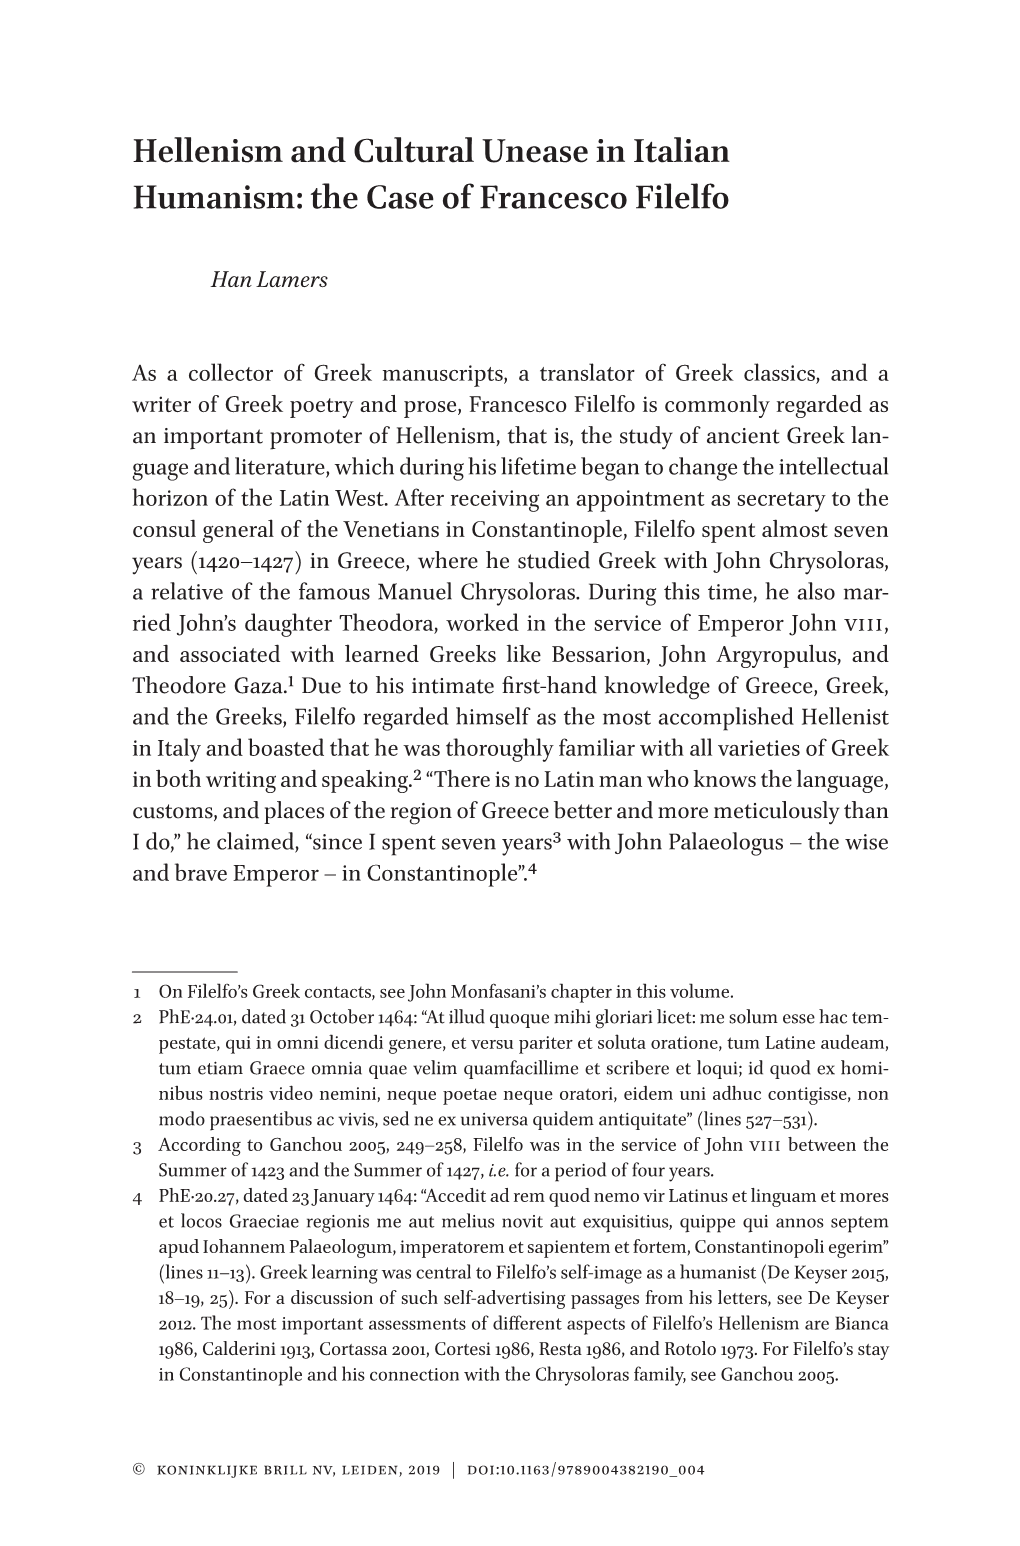 Hellenism and Cultural Unease in Italian Humanism: the Case of Francesco Filelfo